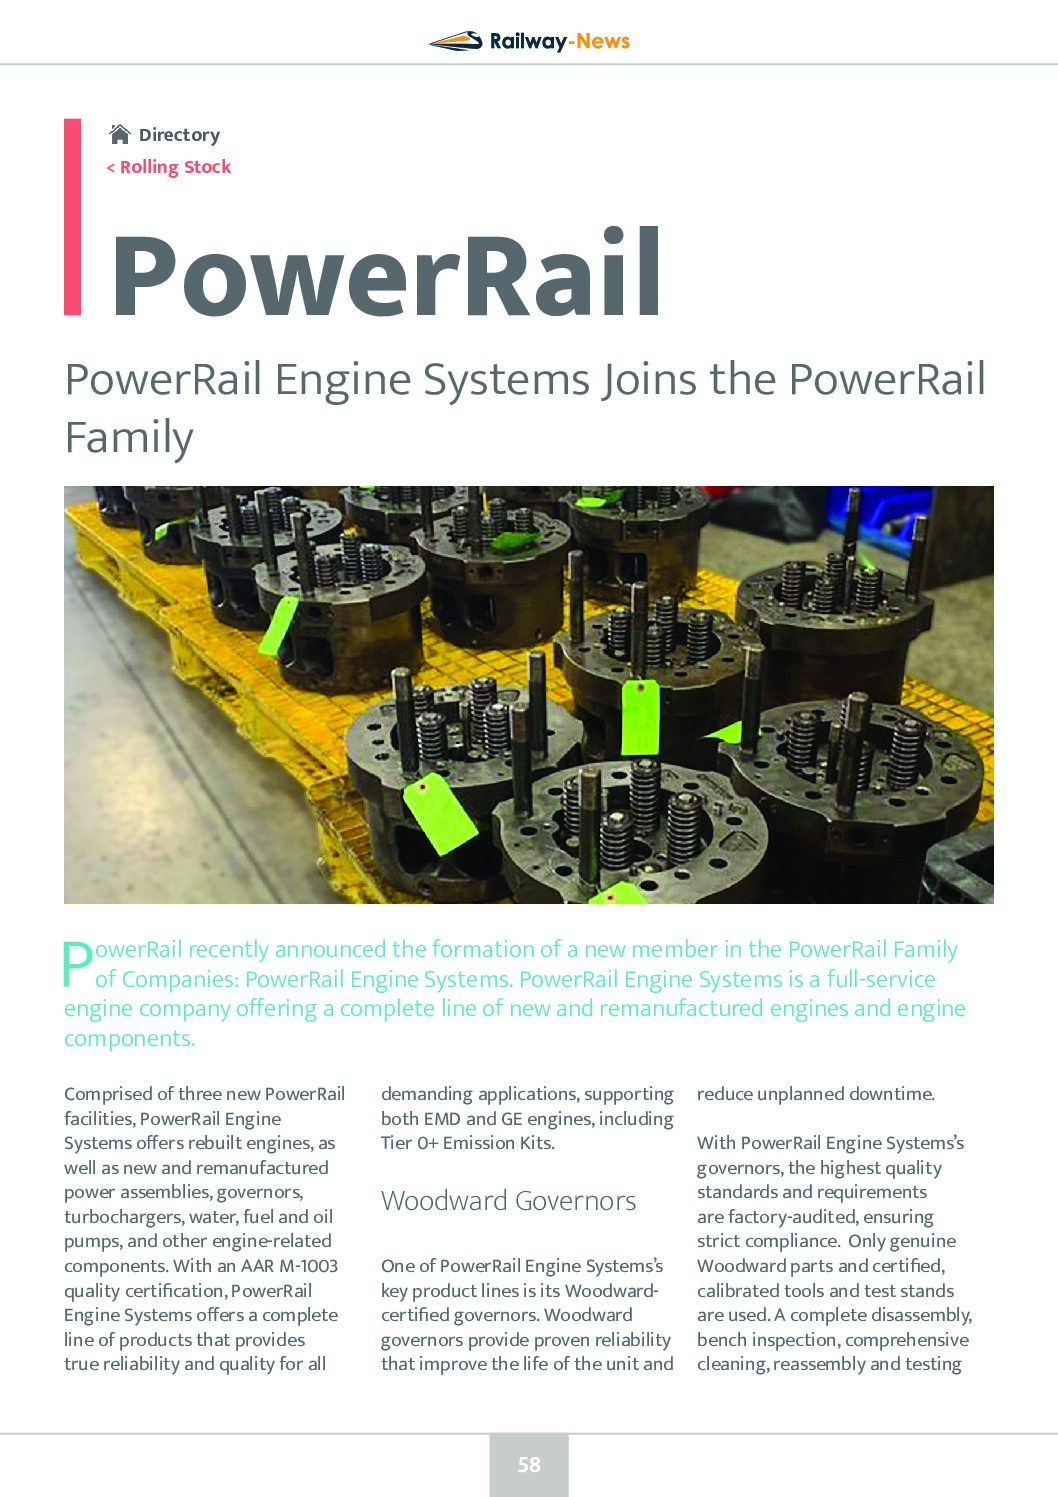 PowerRail – PowerRail Engine Systems Joins the PowerRail Family